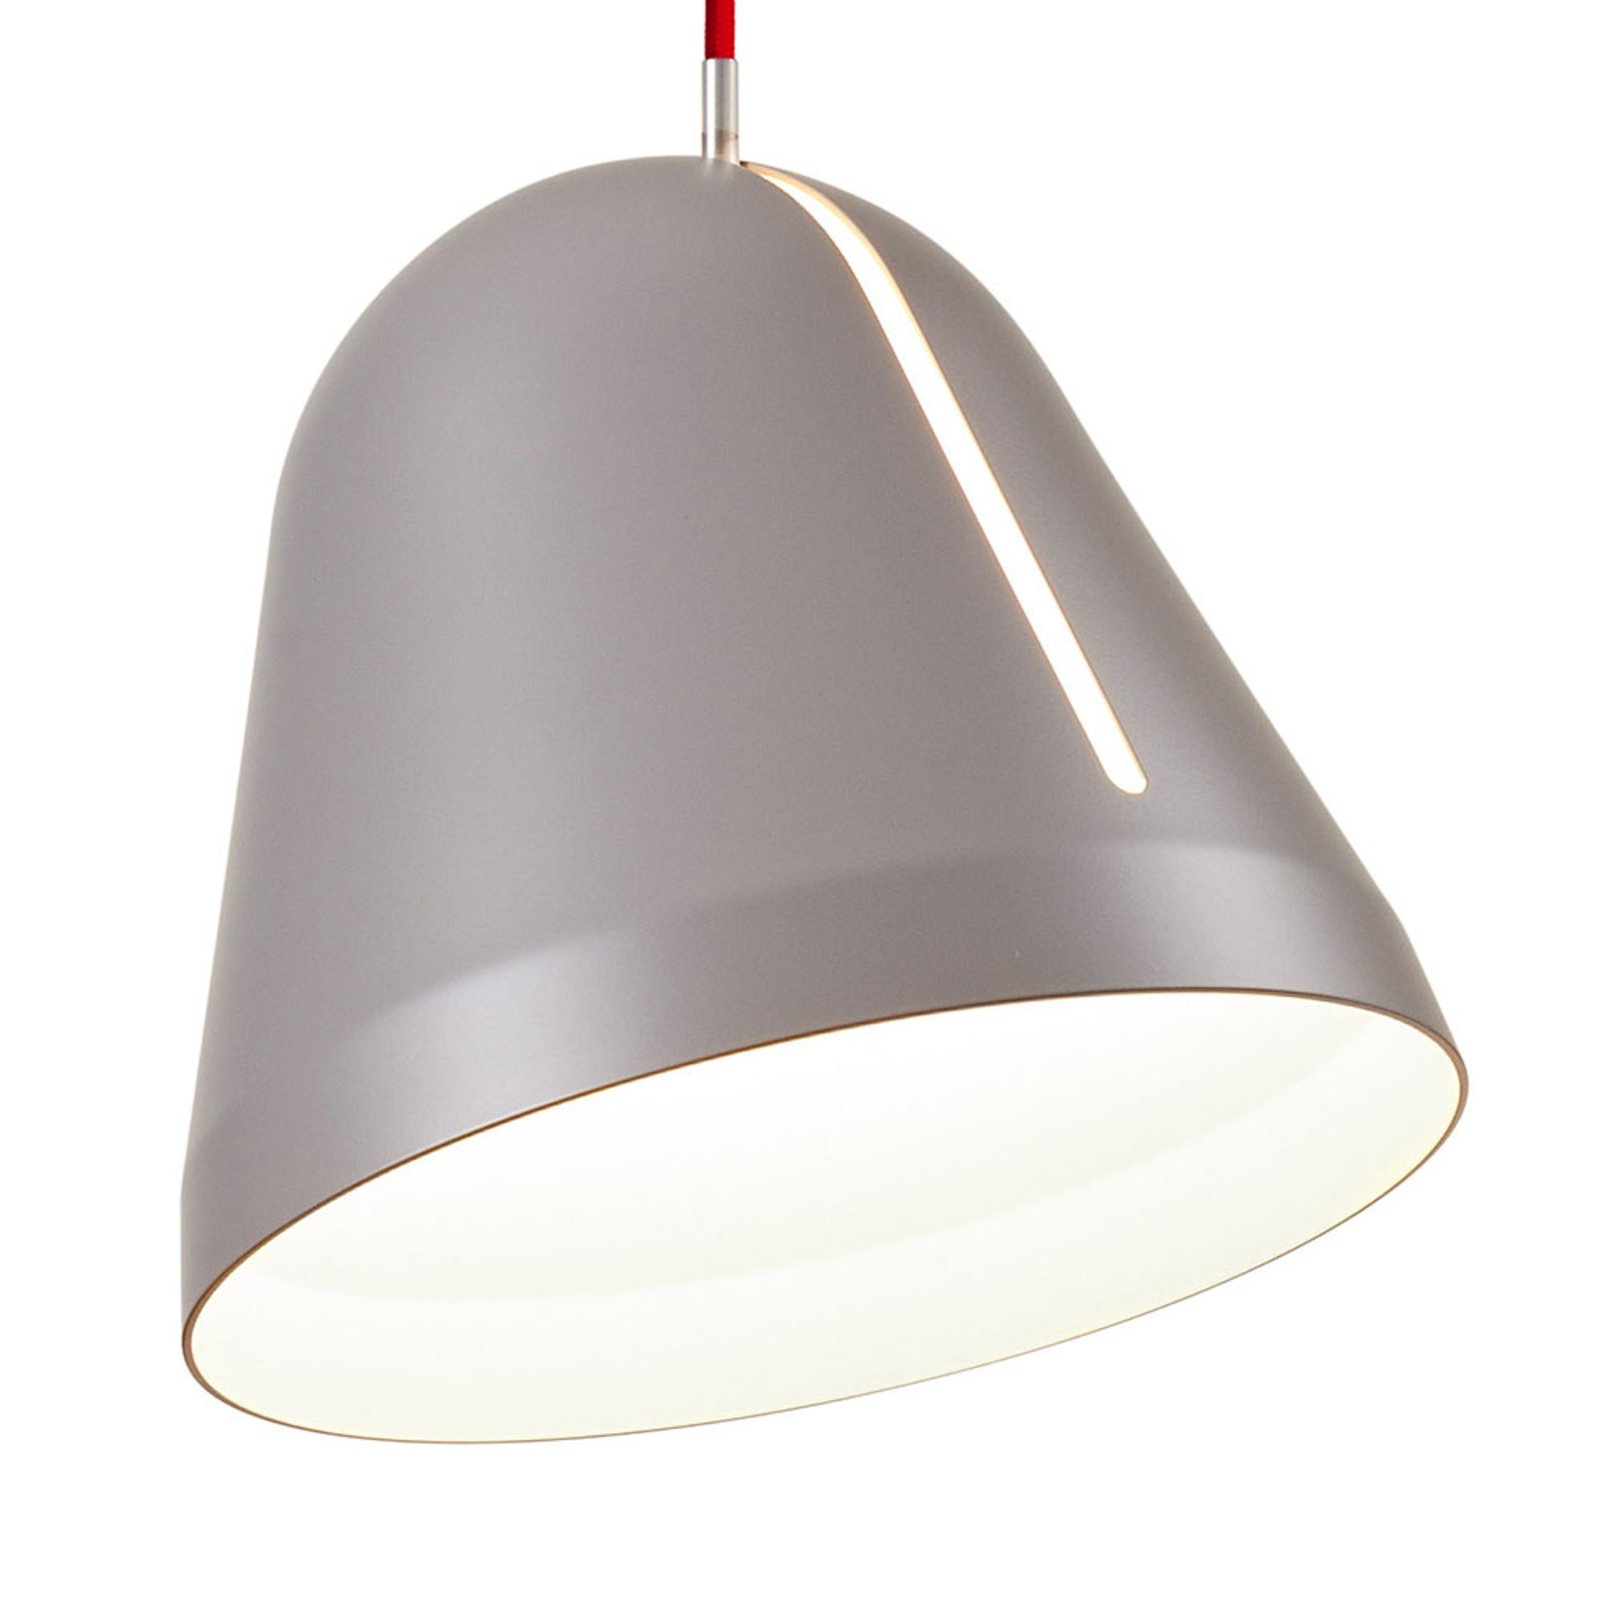 Nyta Tilt pendant light, red 3m cable, grey